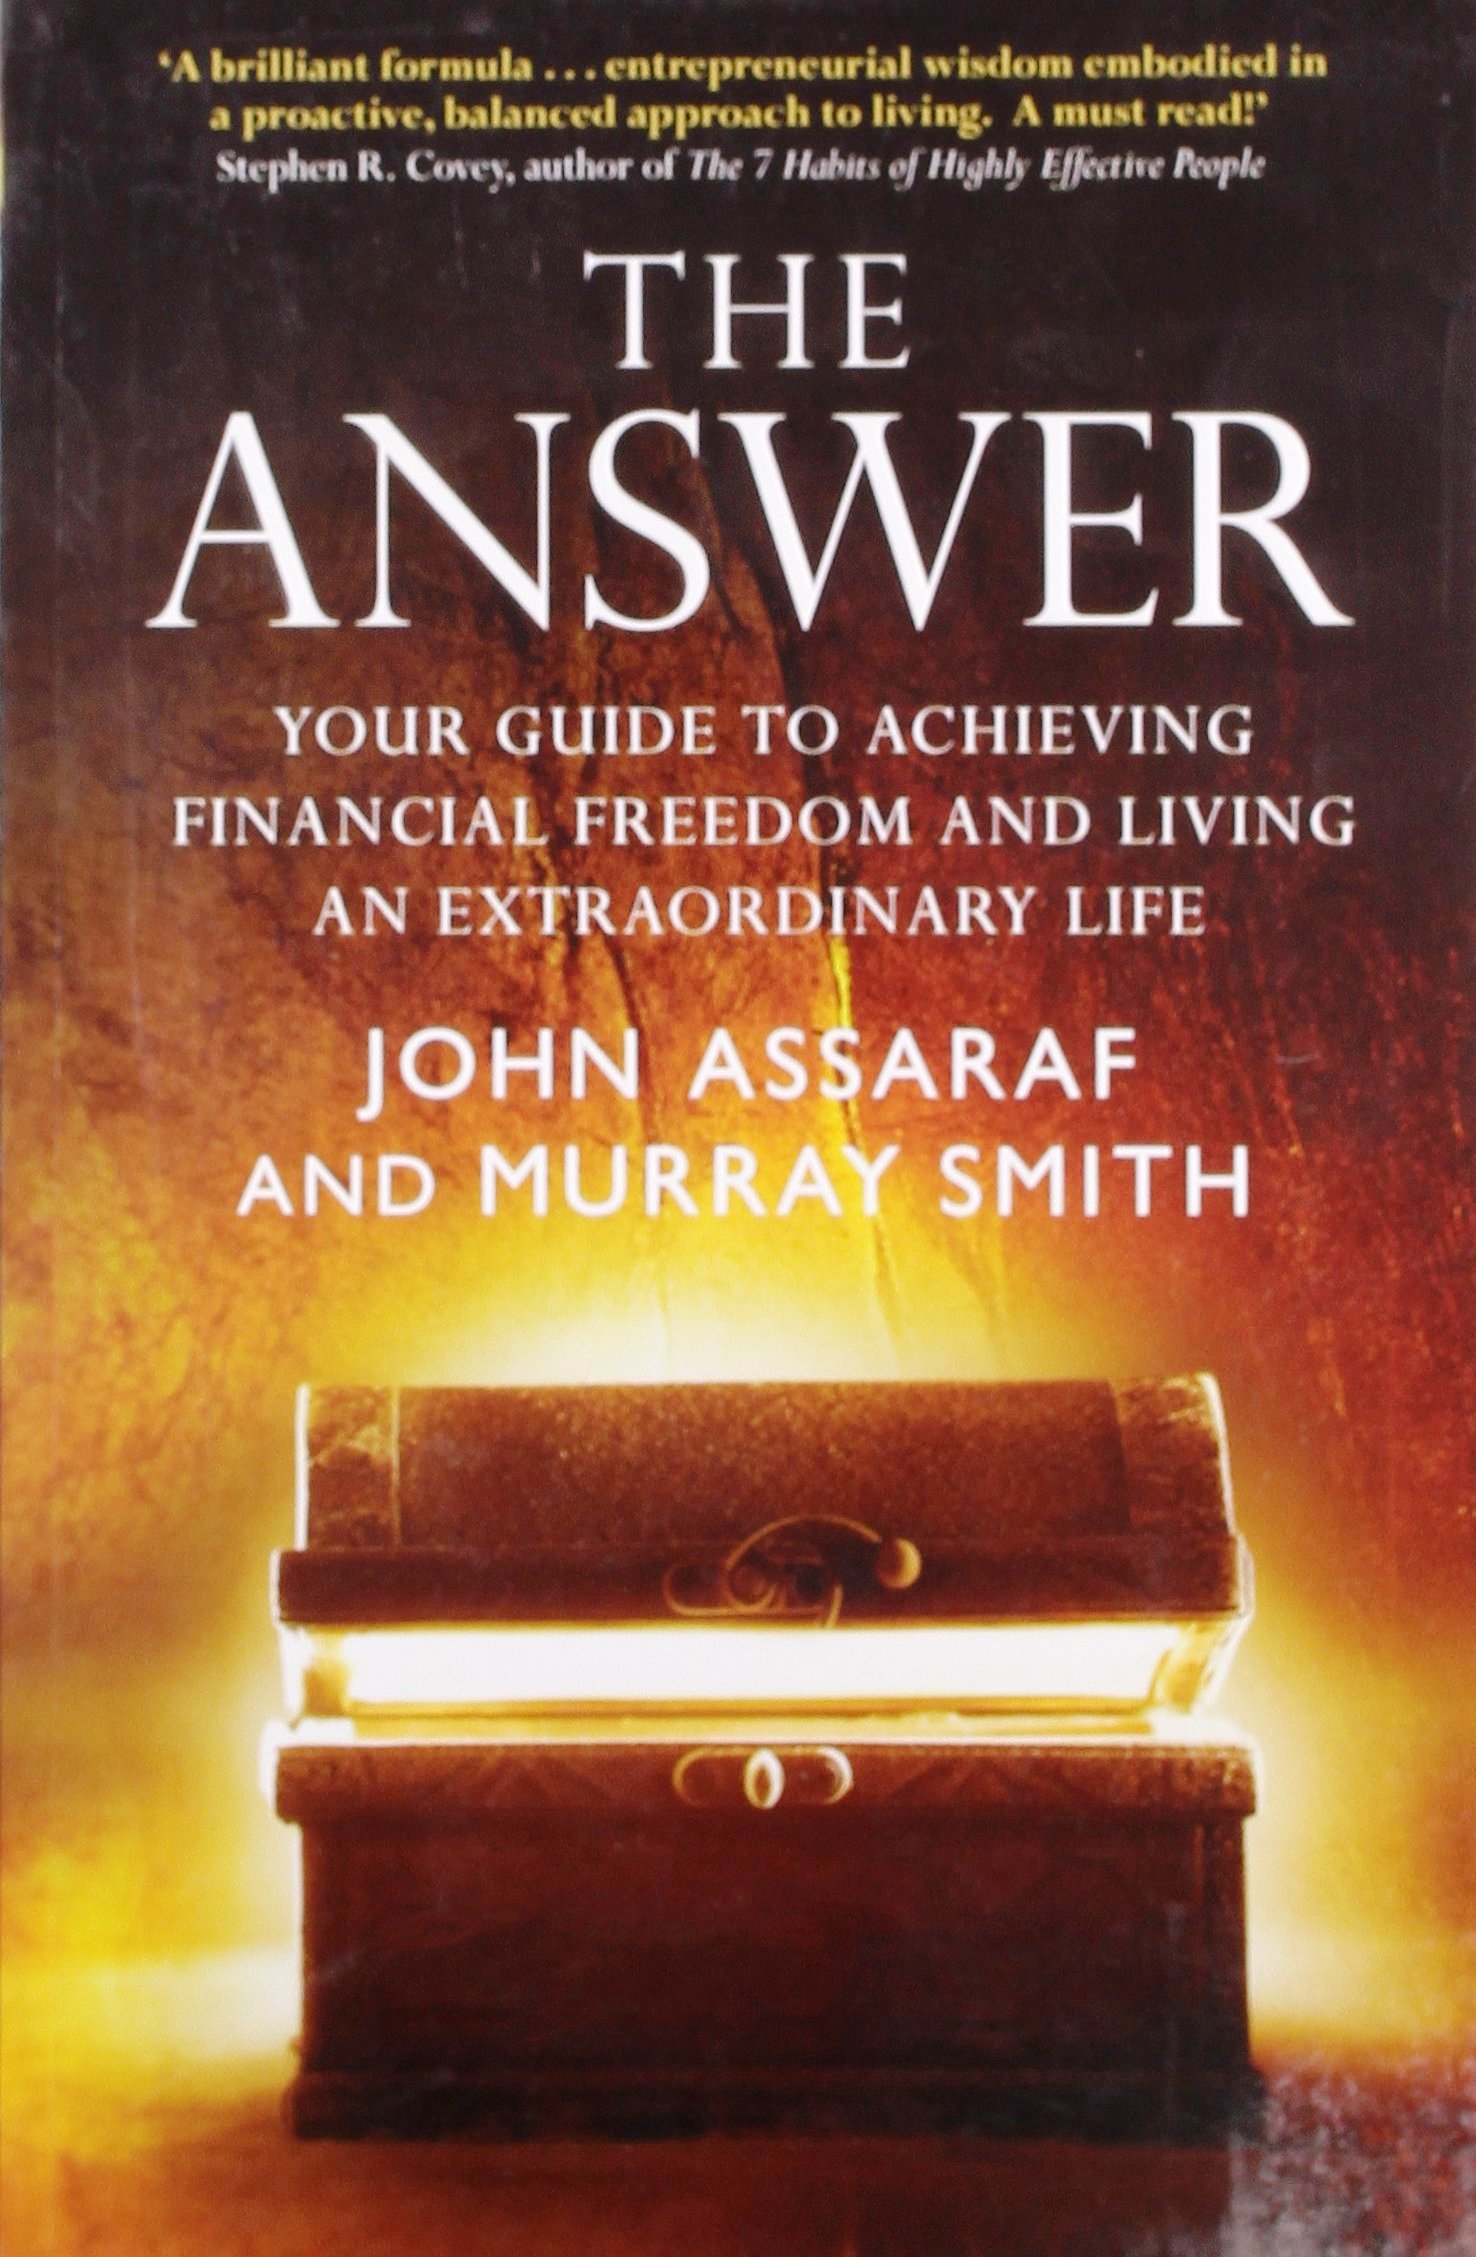 The Answer-Your Guide to Achieving Financial Freedom and Living an Extraordinary Life